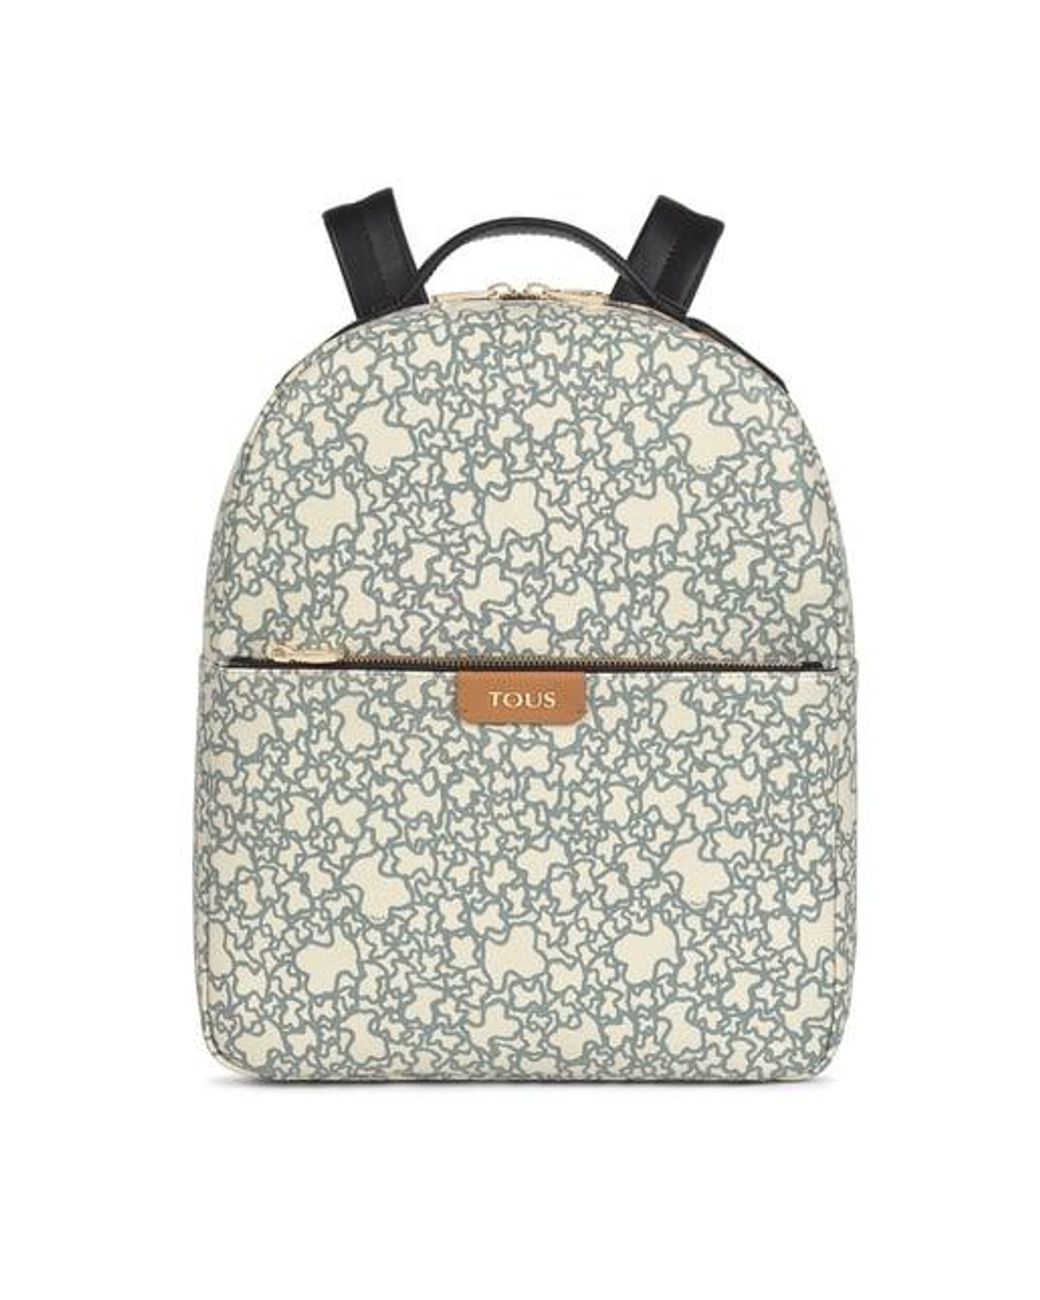 Tous Beige And Black Kaos Mini Backpack in Natural | Lyst